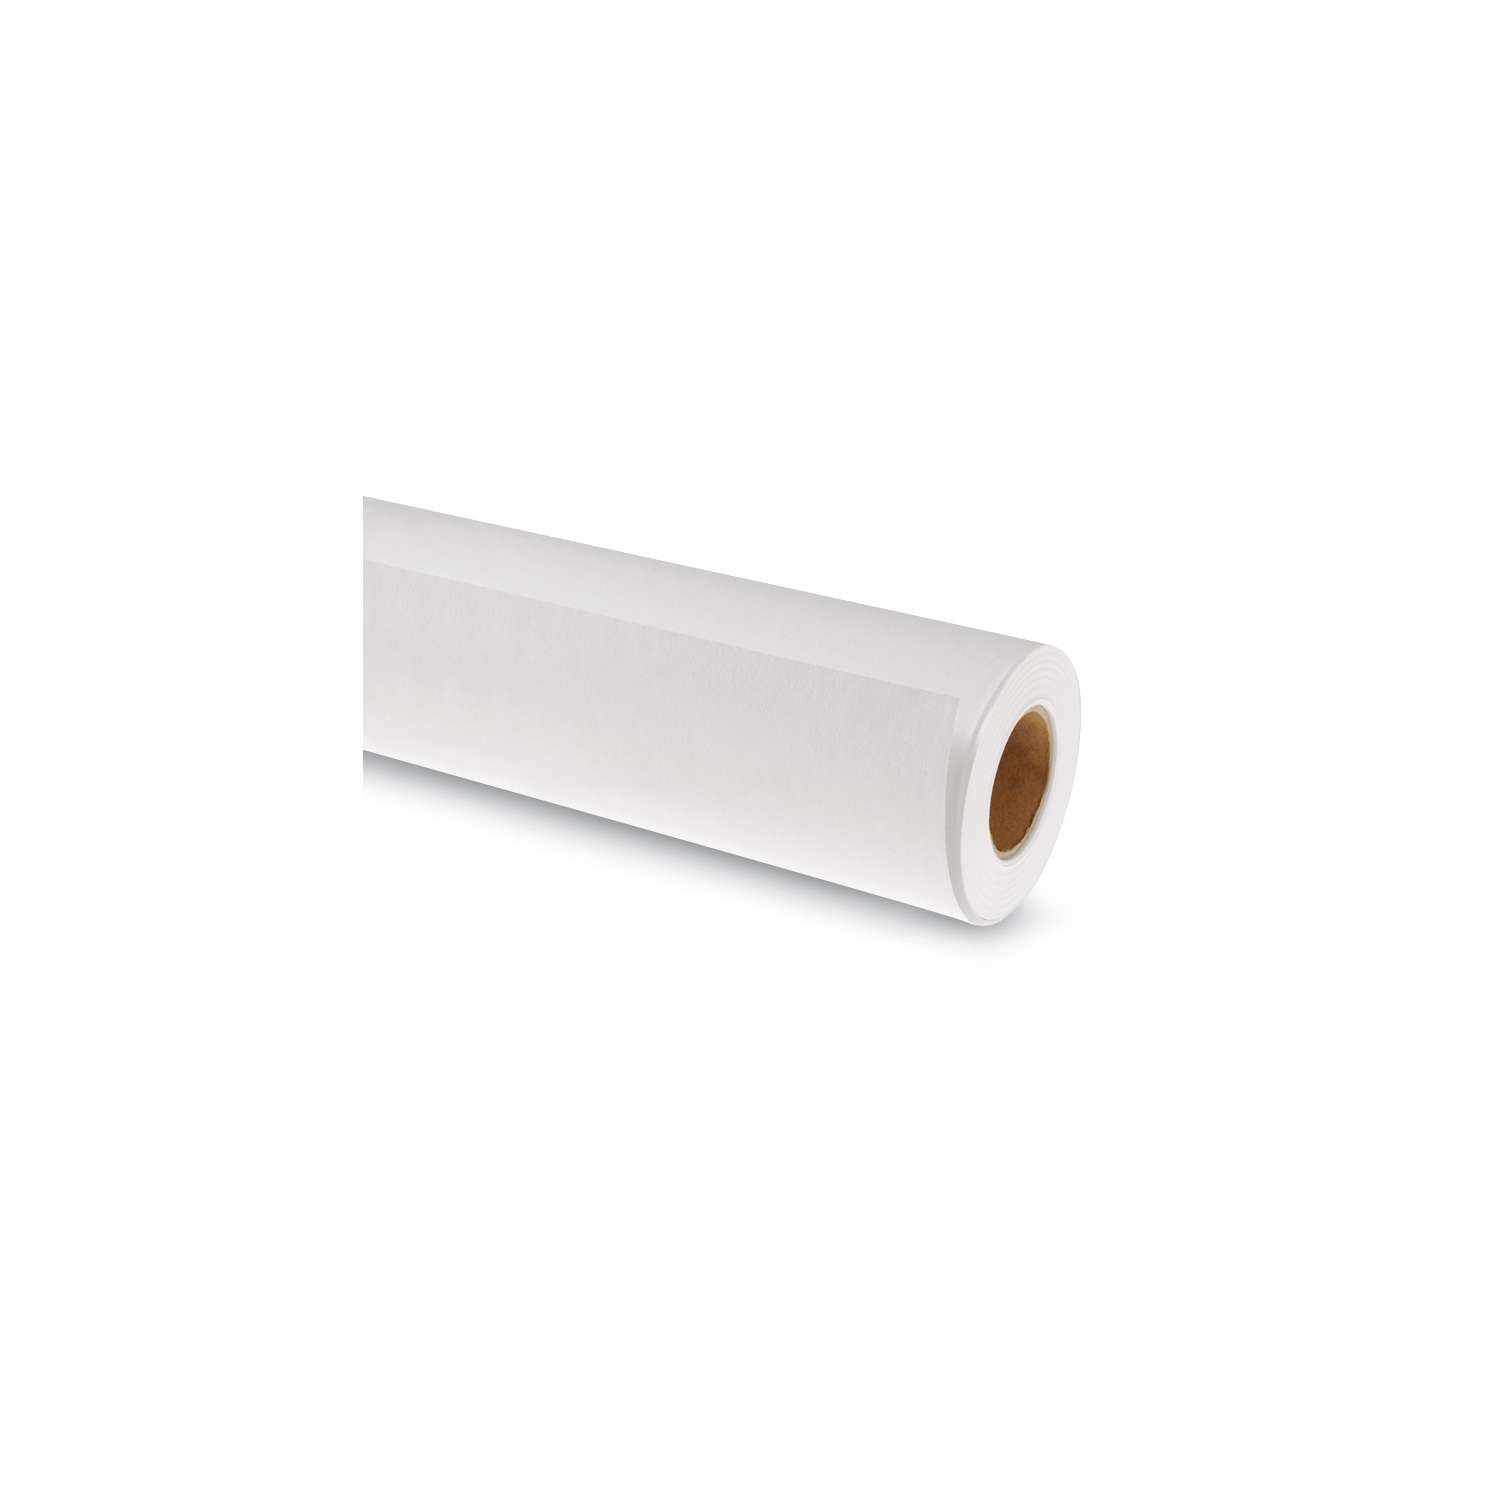 CANSON Packpapier-Rolle 1 x 10 m 1 x 10 m weiß